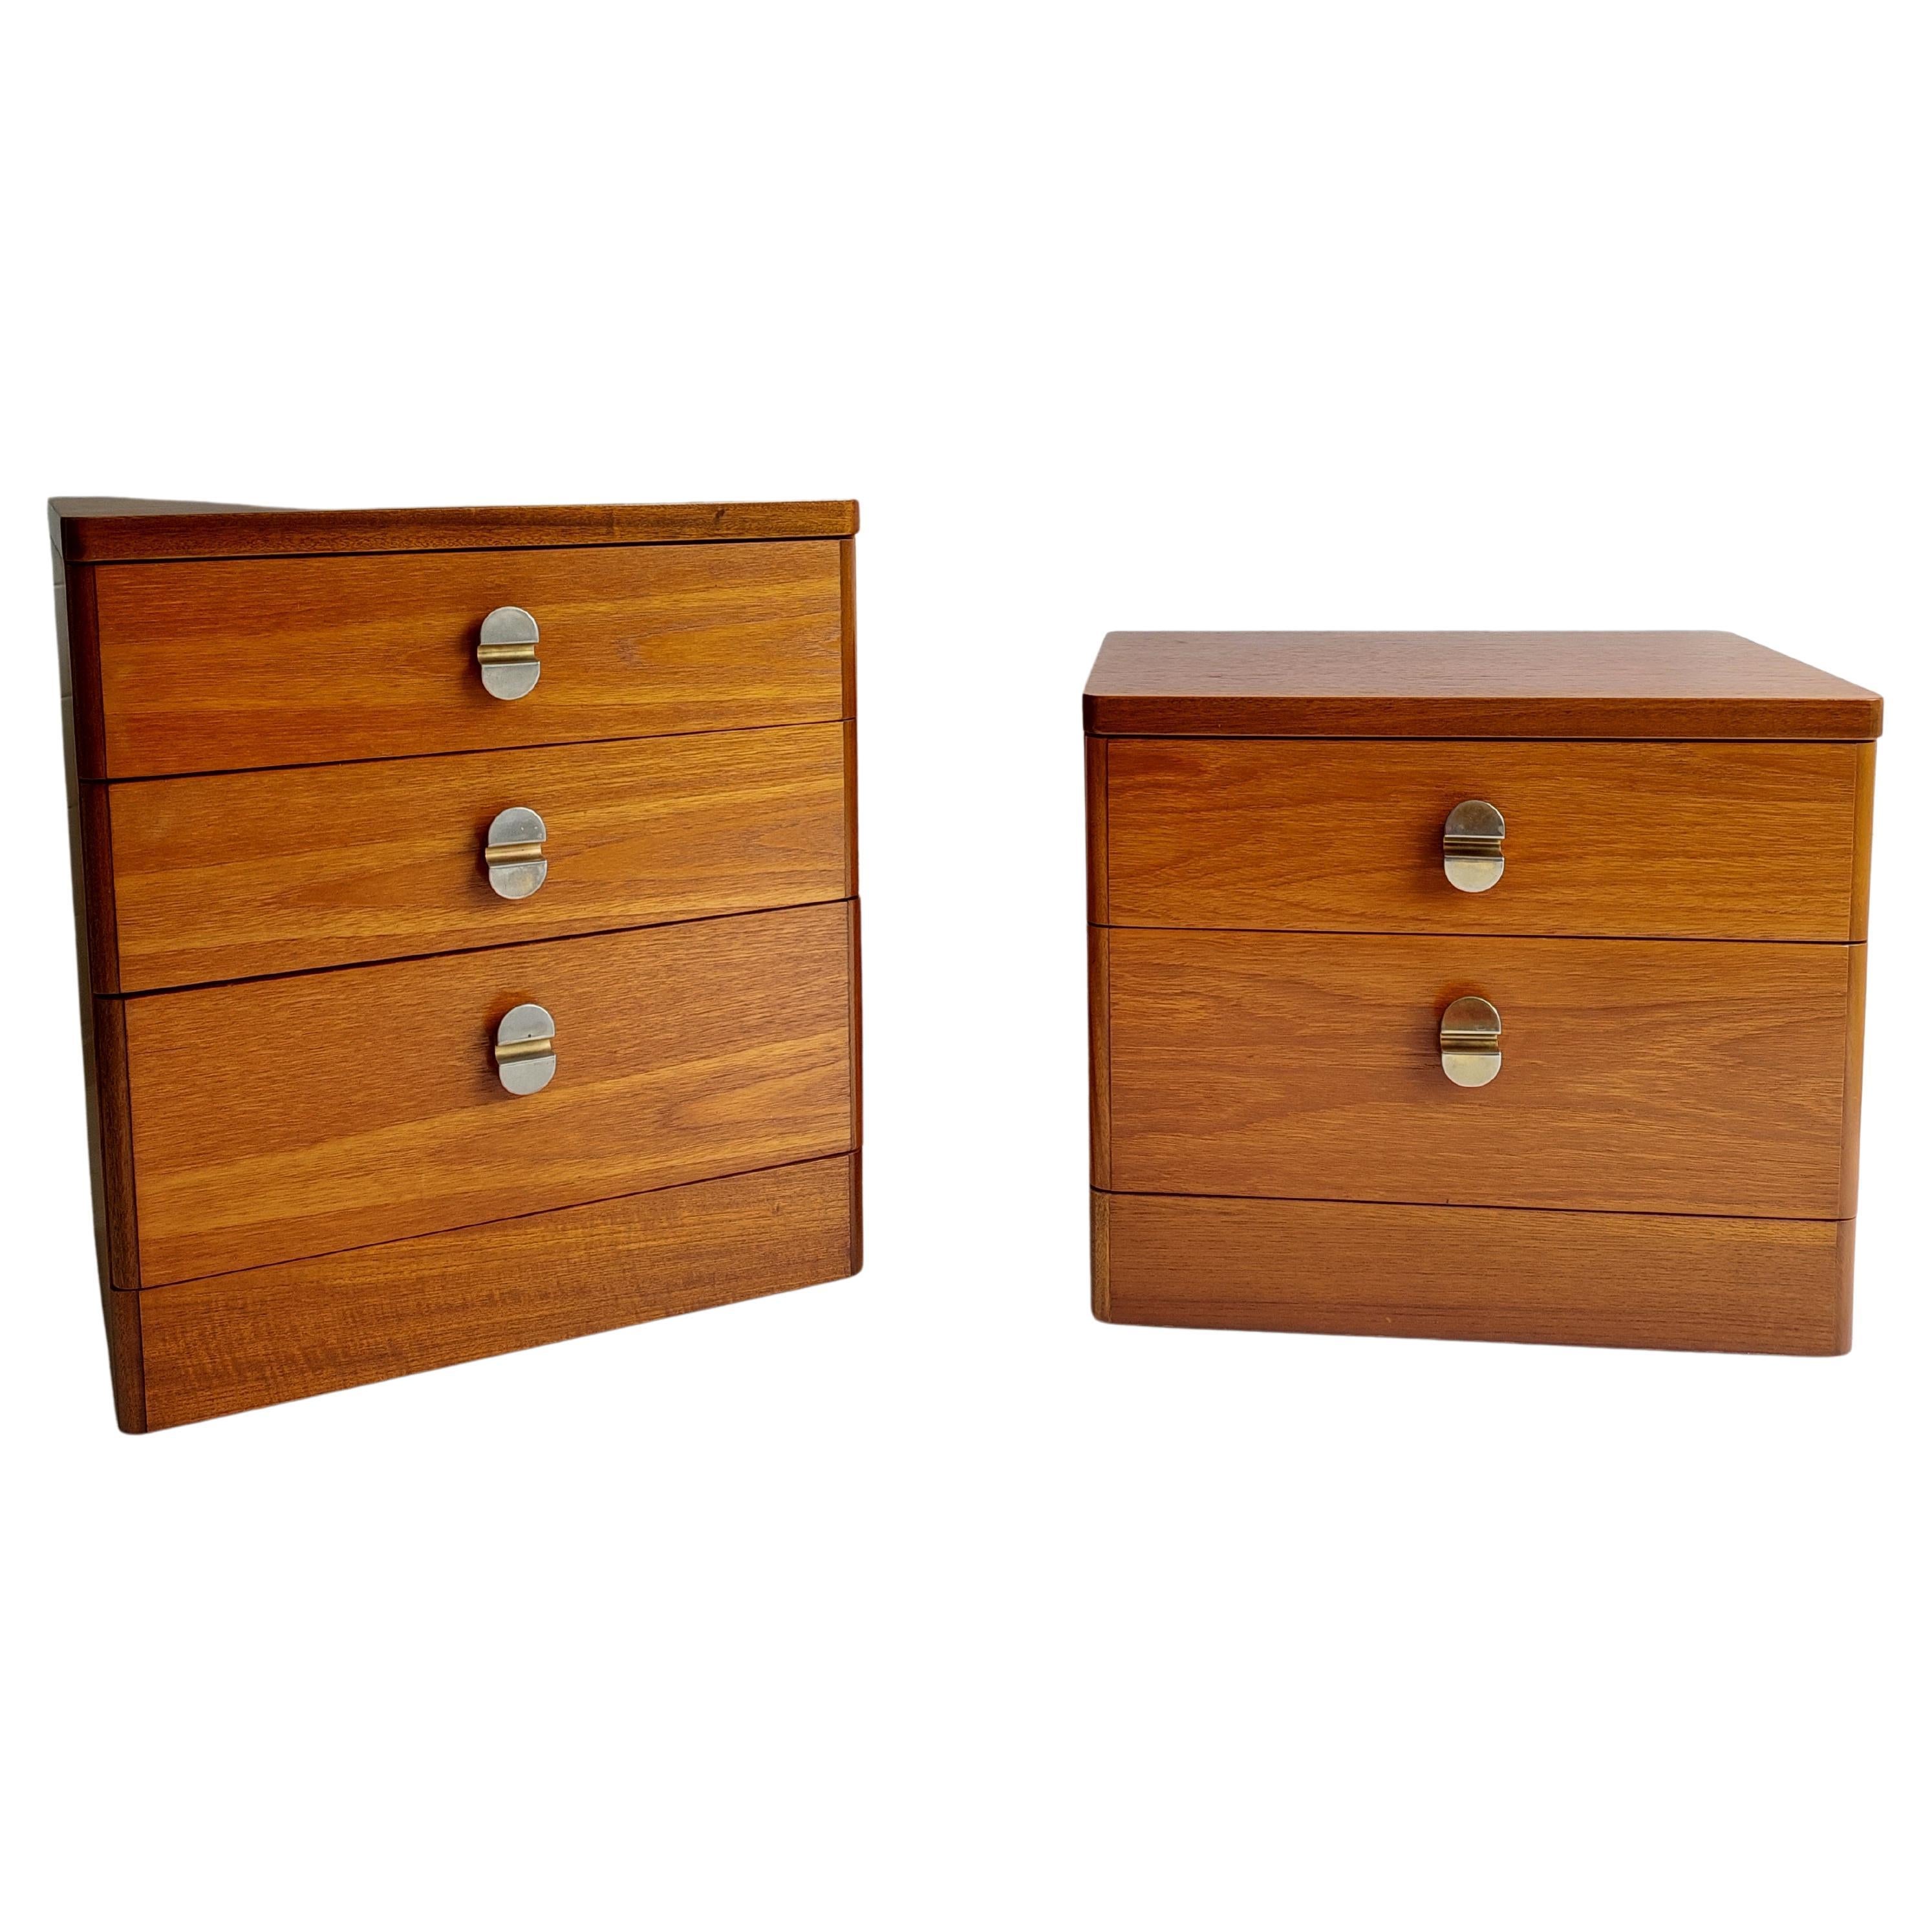 Retro Midcentury Stag Cantata Teak Bedside Tables Drawers Nightstands, 70s